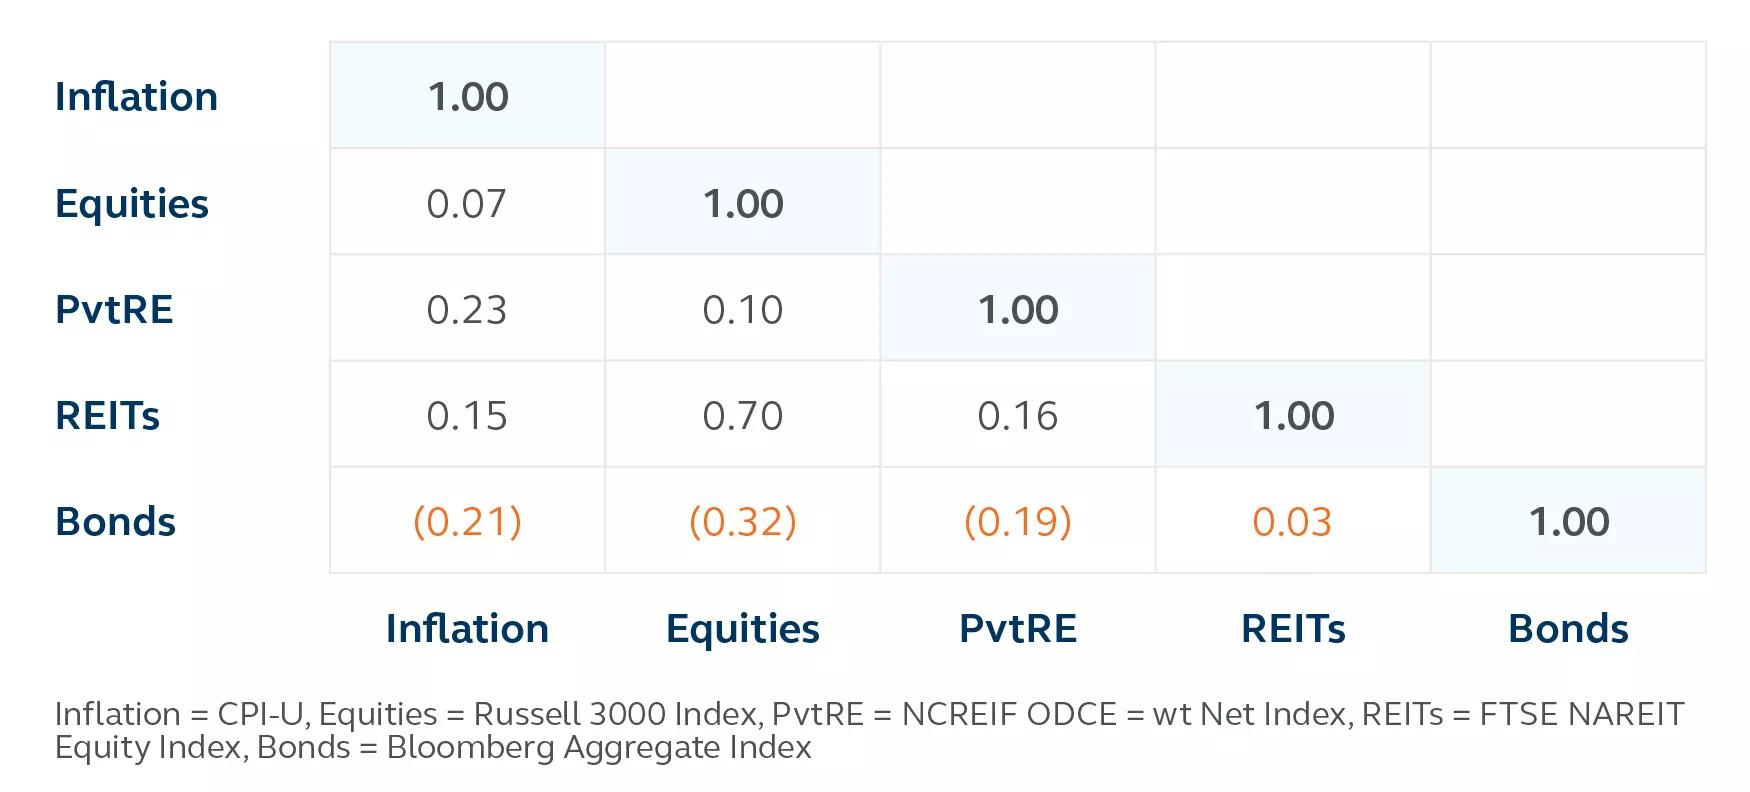 Table showing the correlation between inflation, equities, private real estate, REITs, and bonds